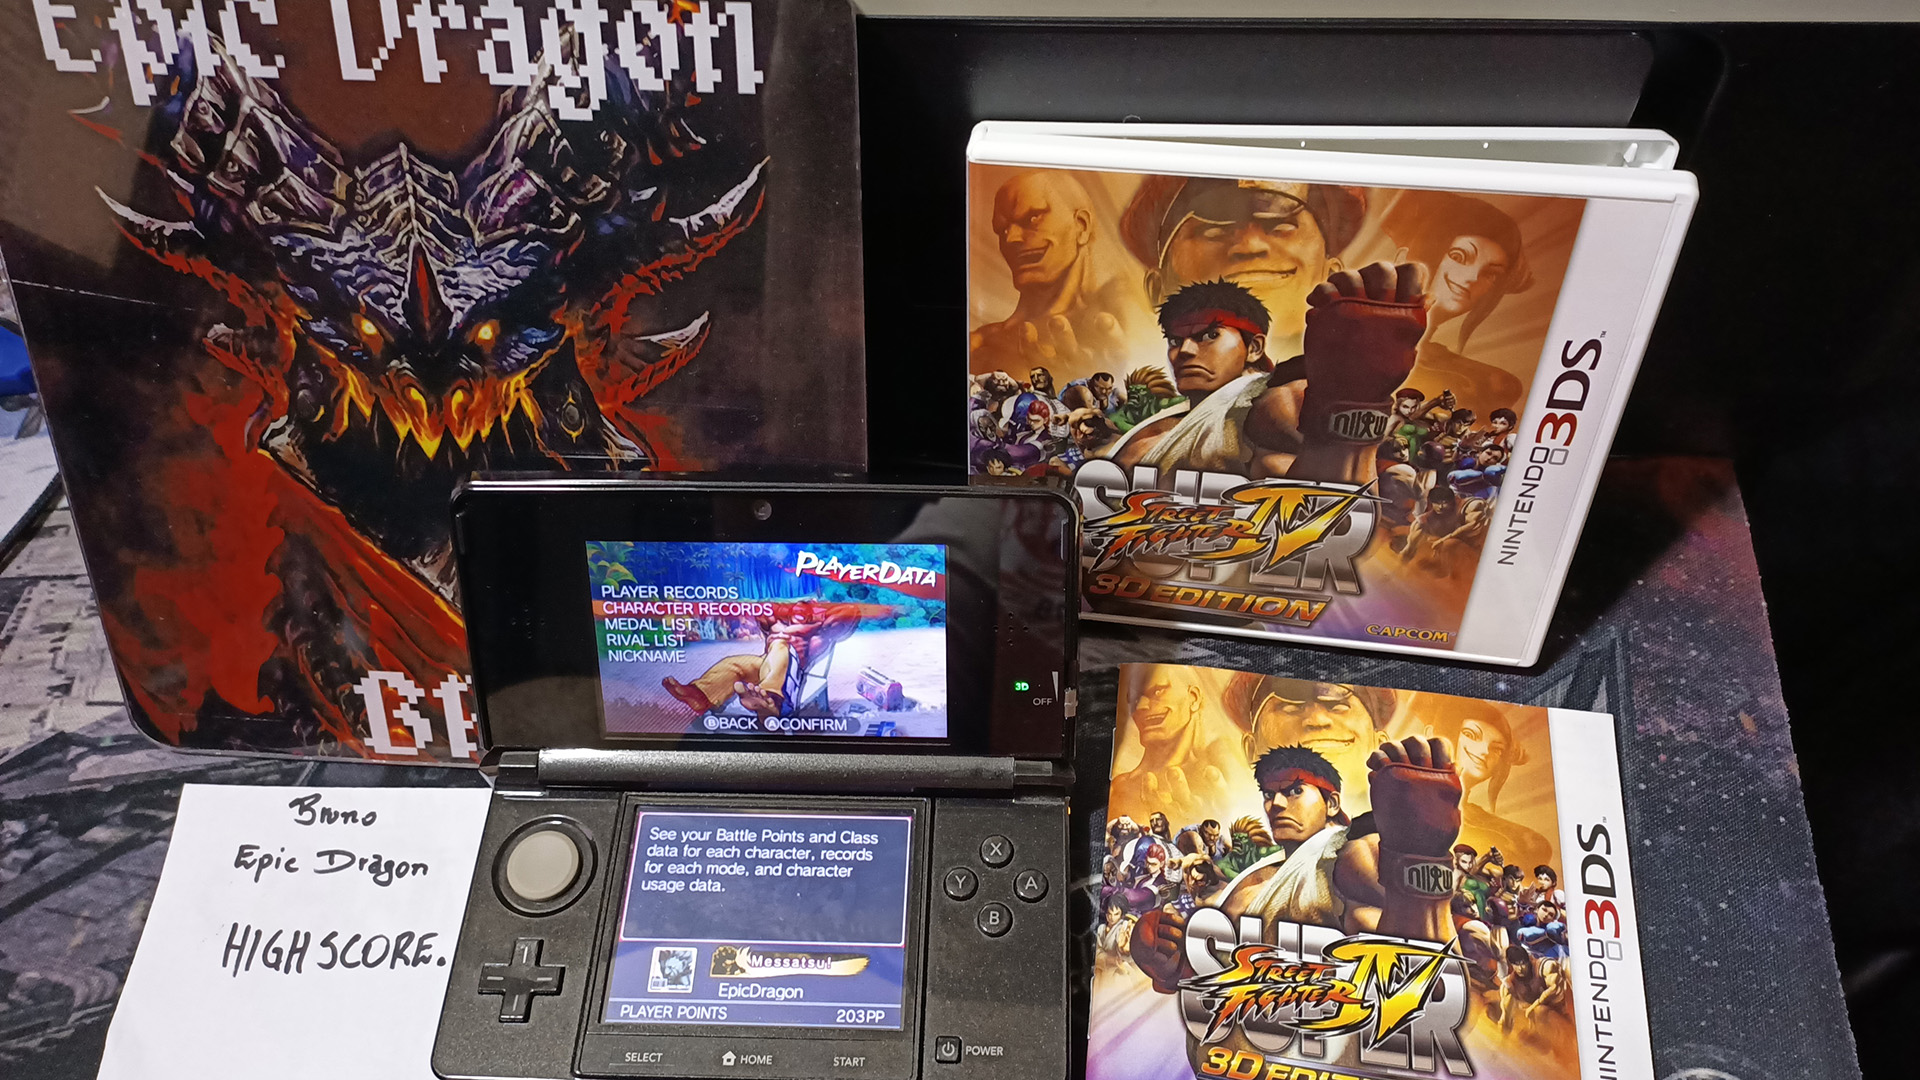 EpicDragon: Super Street Fighter IV 3D Edition: Challenge: Car Crusher: Ryu (Nintendo 3DS) 101,600 points on 2022-08-17 21:10:42